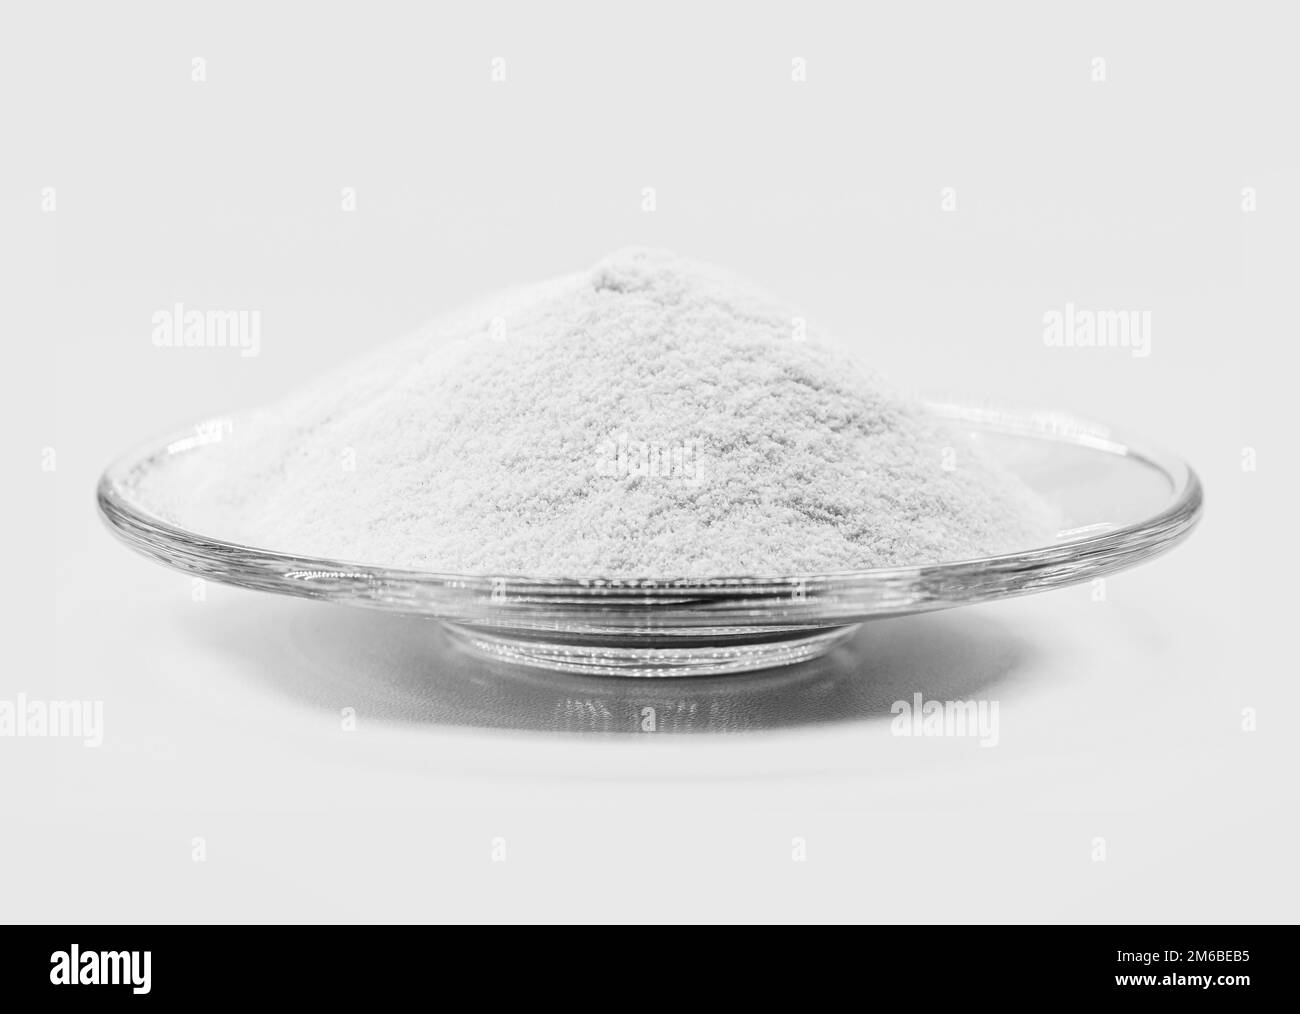 mica sericite or sericite is a fine grayish white powder, a hydrated potassium alumina silicate. Component of the food industry. Stock Photo